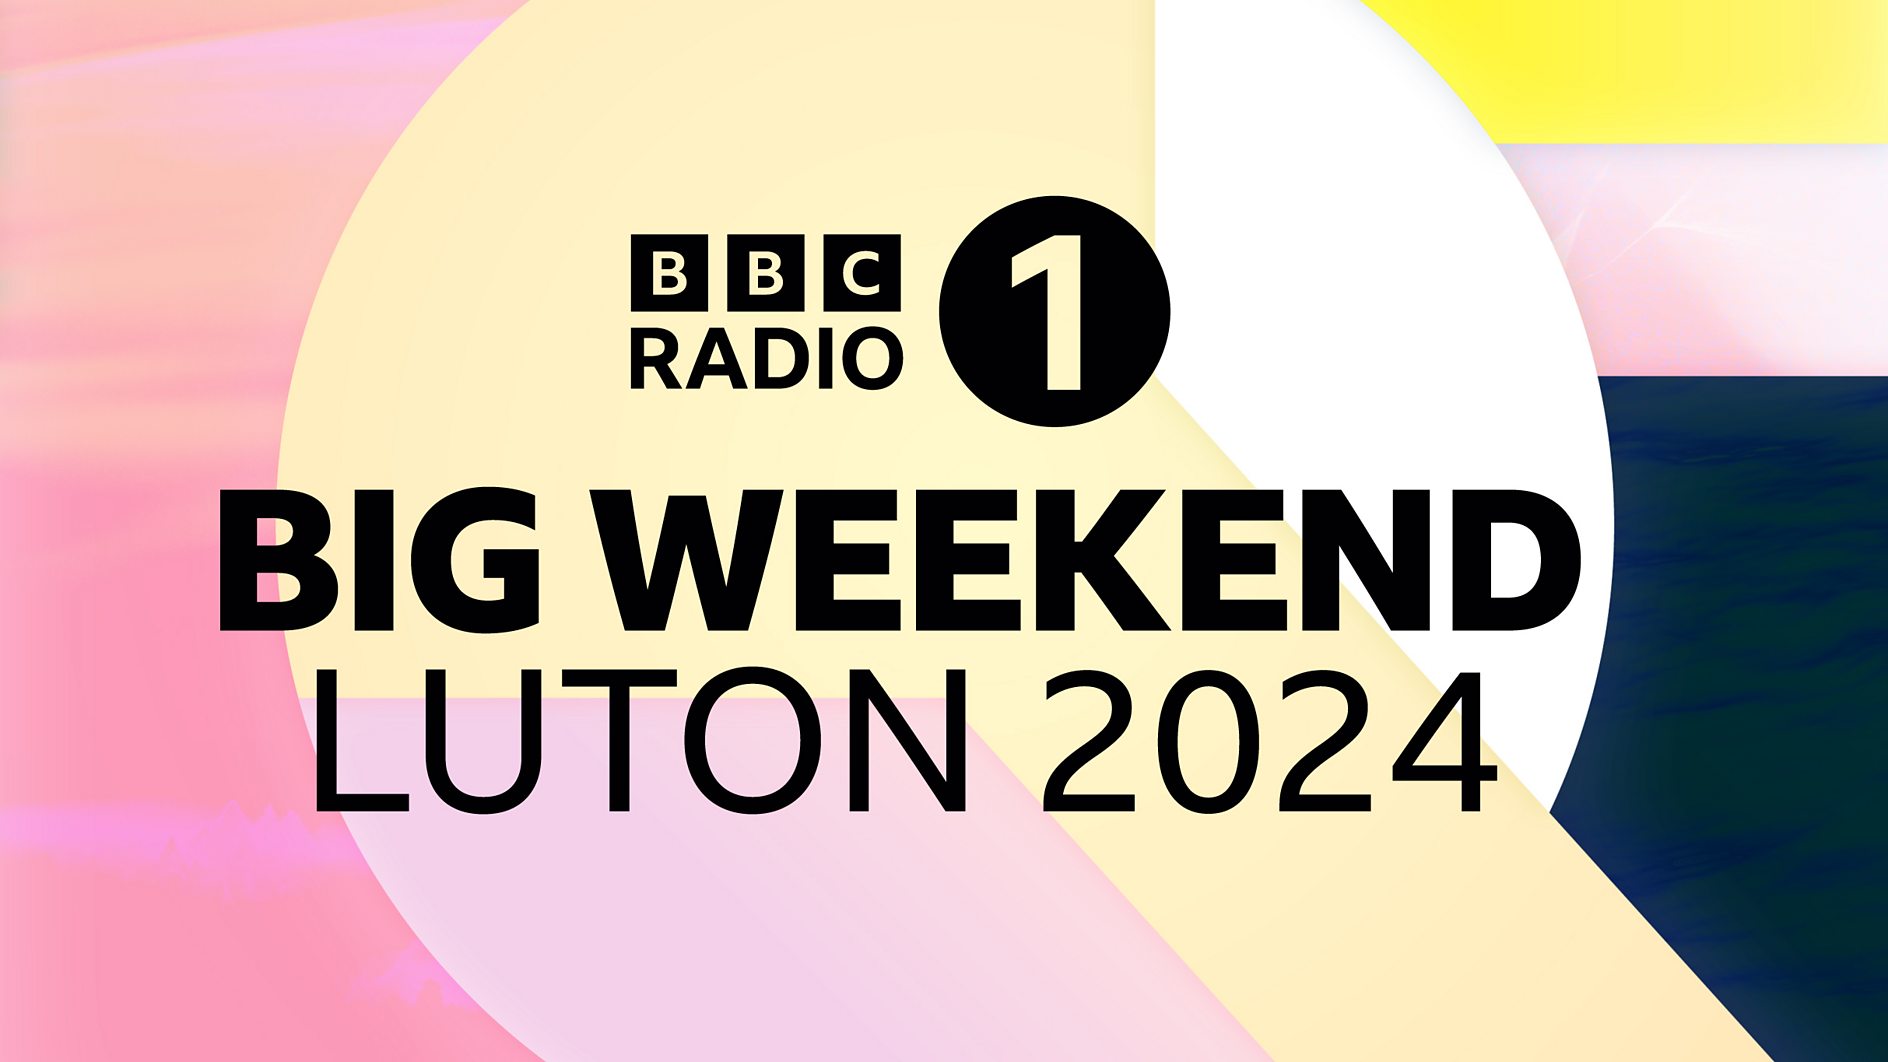 Radio 1’s Big Weekend 2024 to take place in Luton